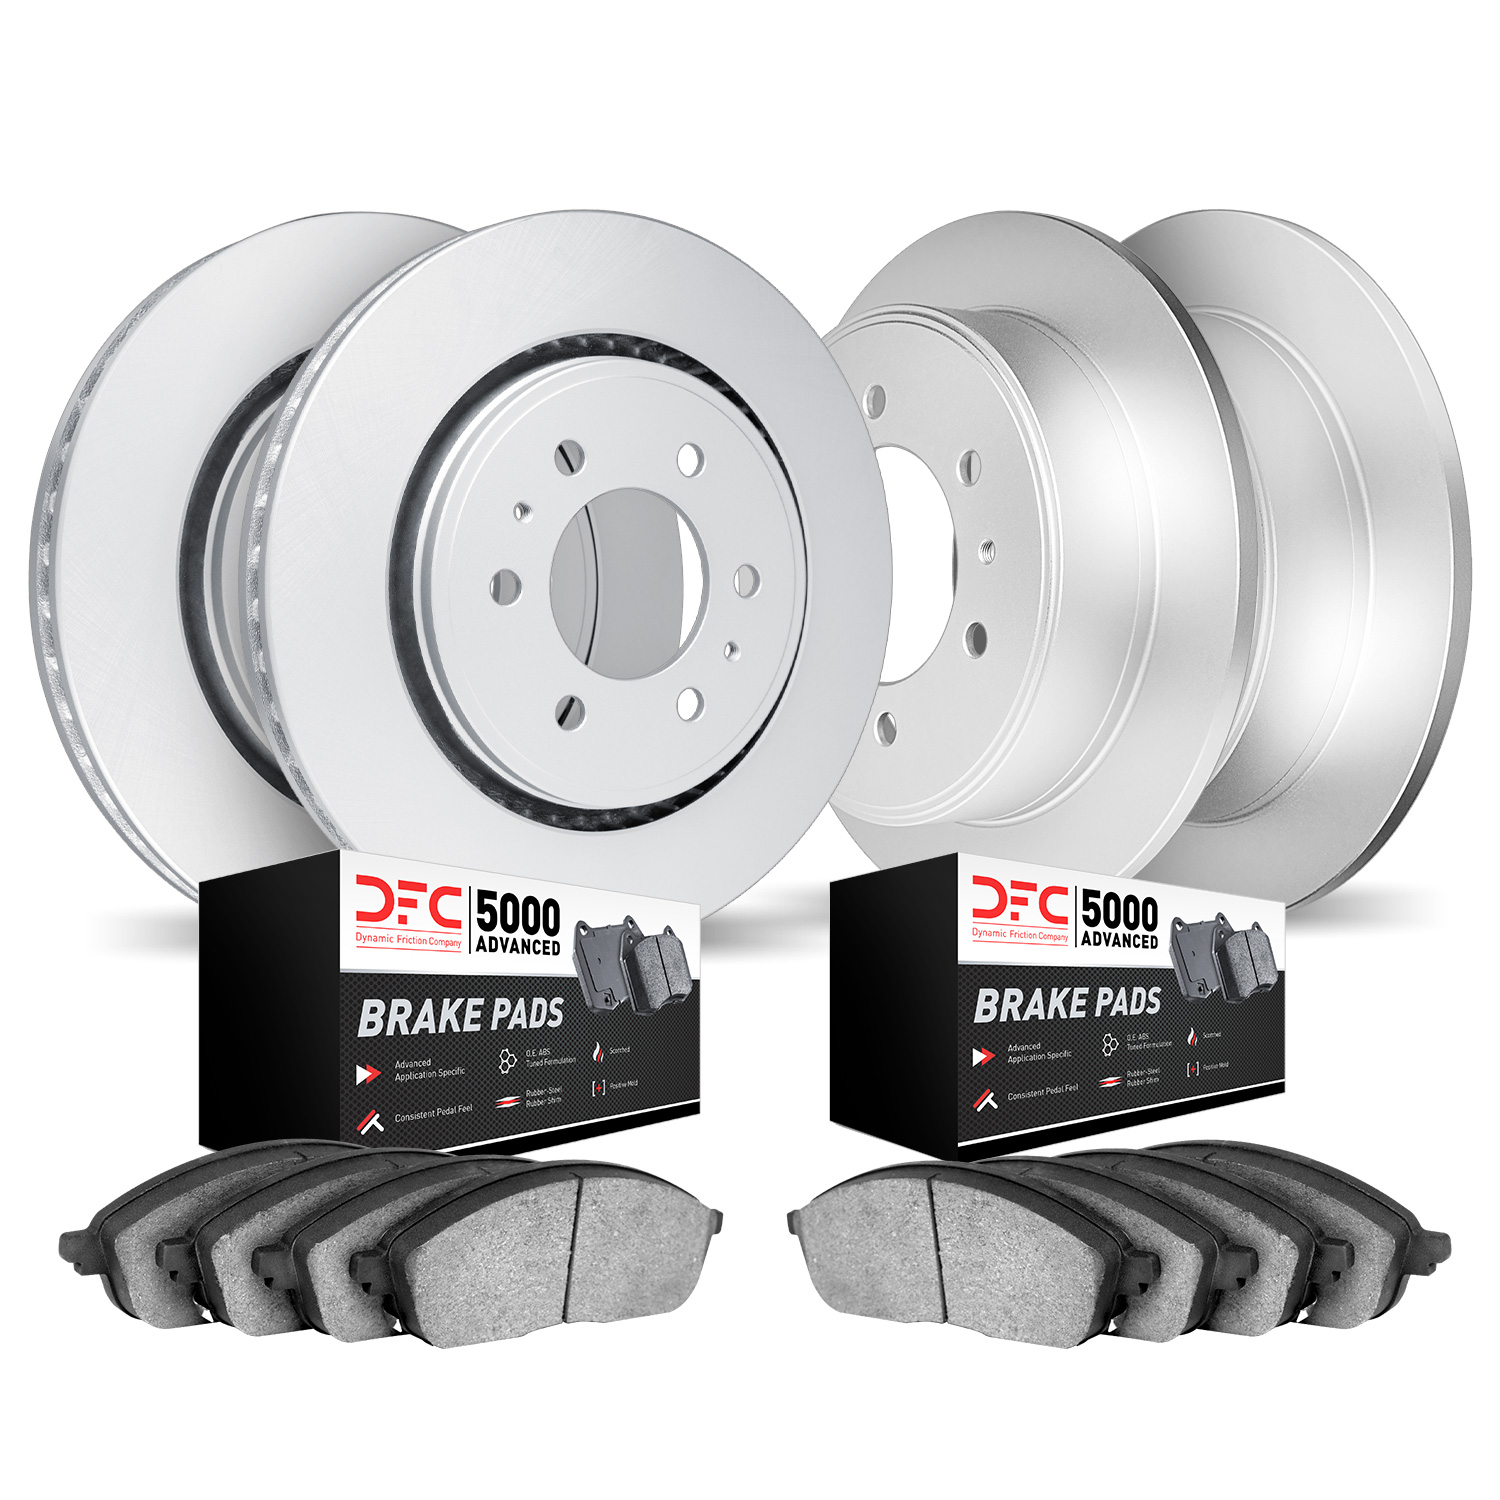 4504-54282 Geospec Brake Rotors w/5000 Advanced Brake Pads Kit, Fits Select Ford/Lincoln/Mercury/Mazda, Position: Front and Rear